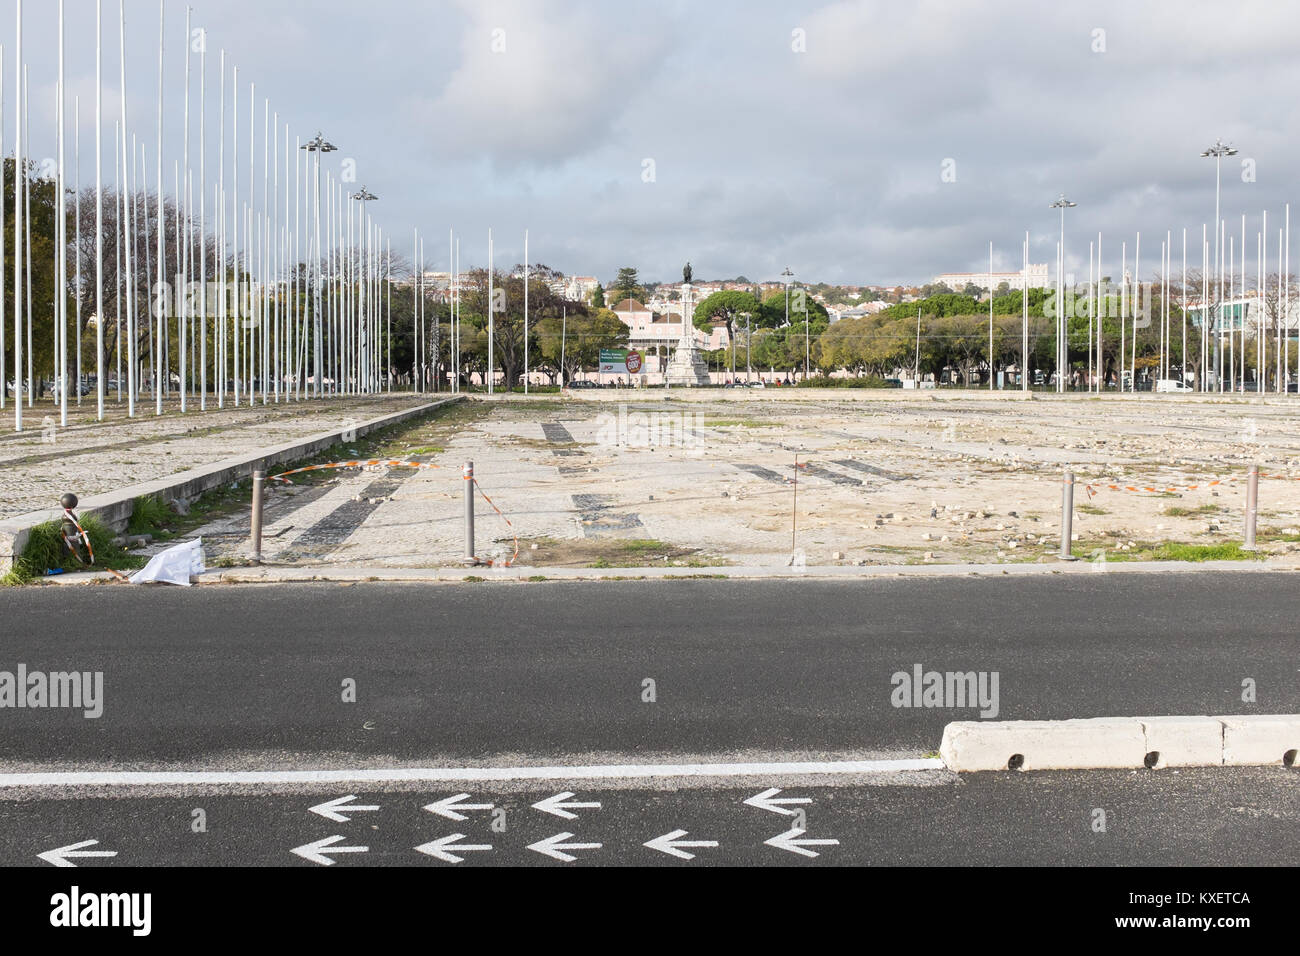 Neglected large square on Av Brasilia in Portugal with rows of flag poles and crumbling surface Stock Photo